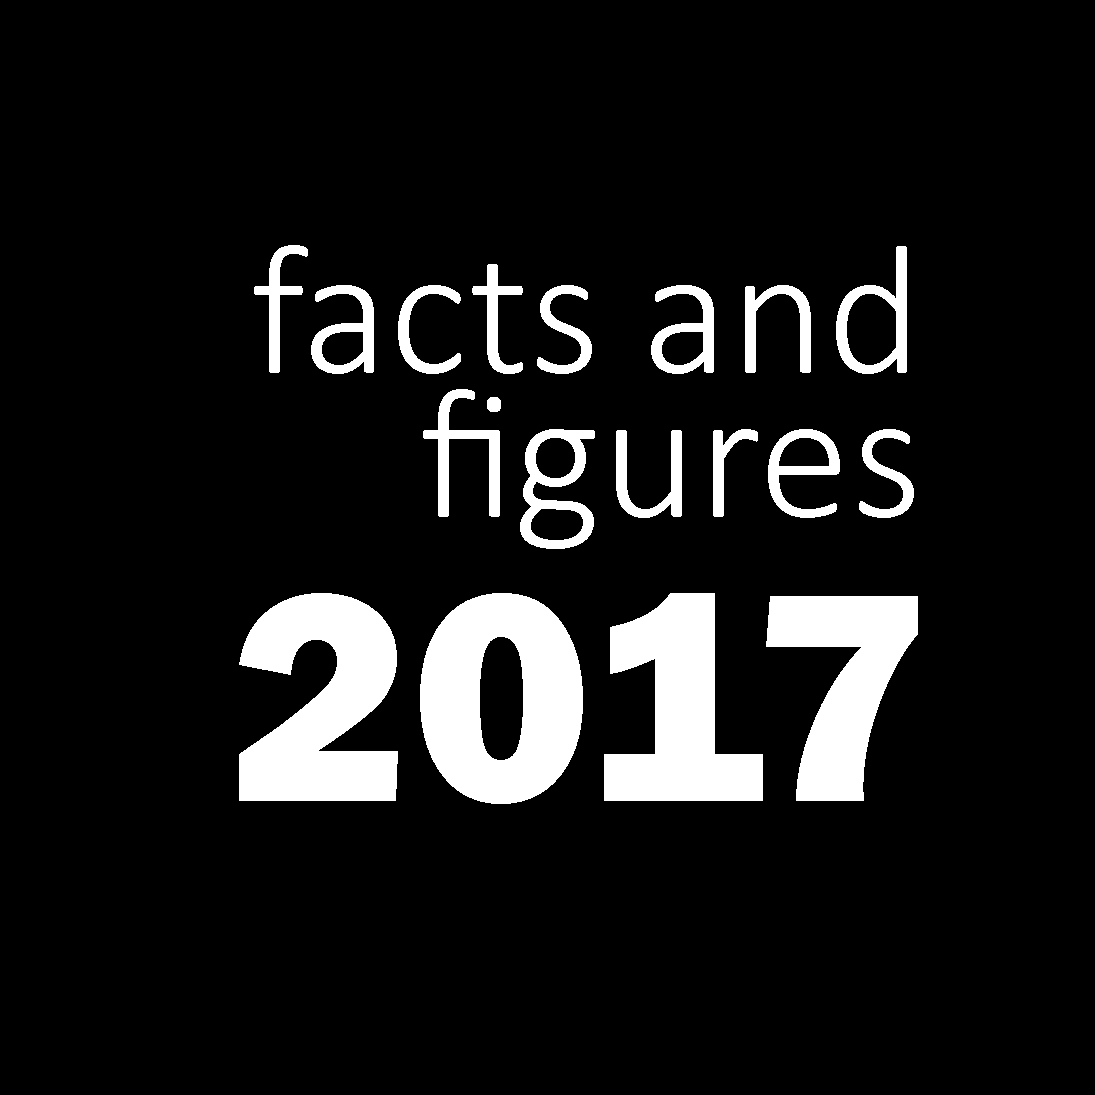 Fact and figures 2017 logo